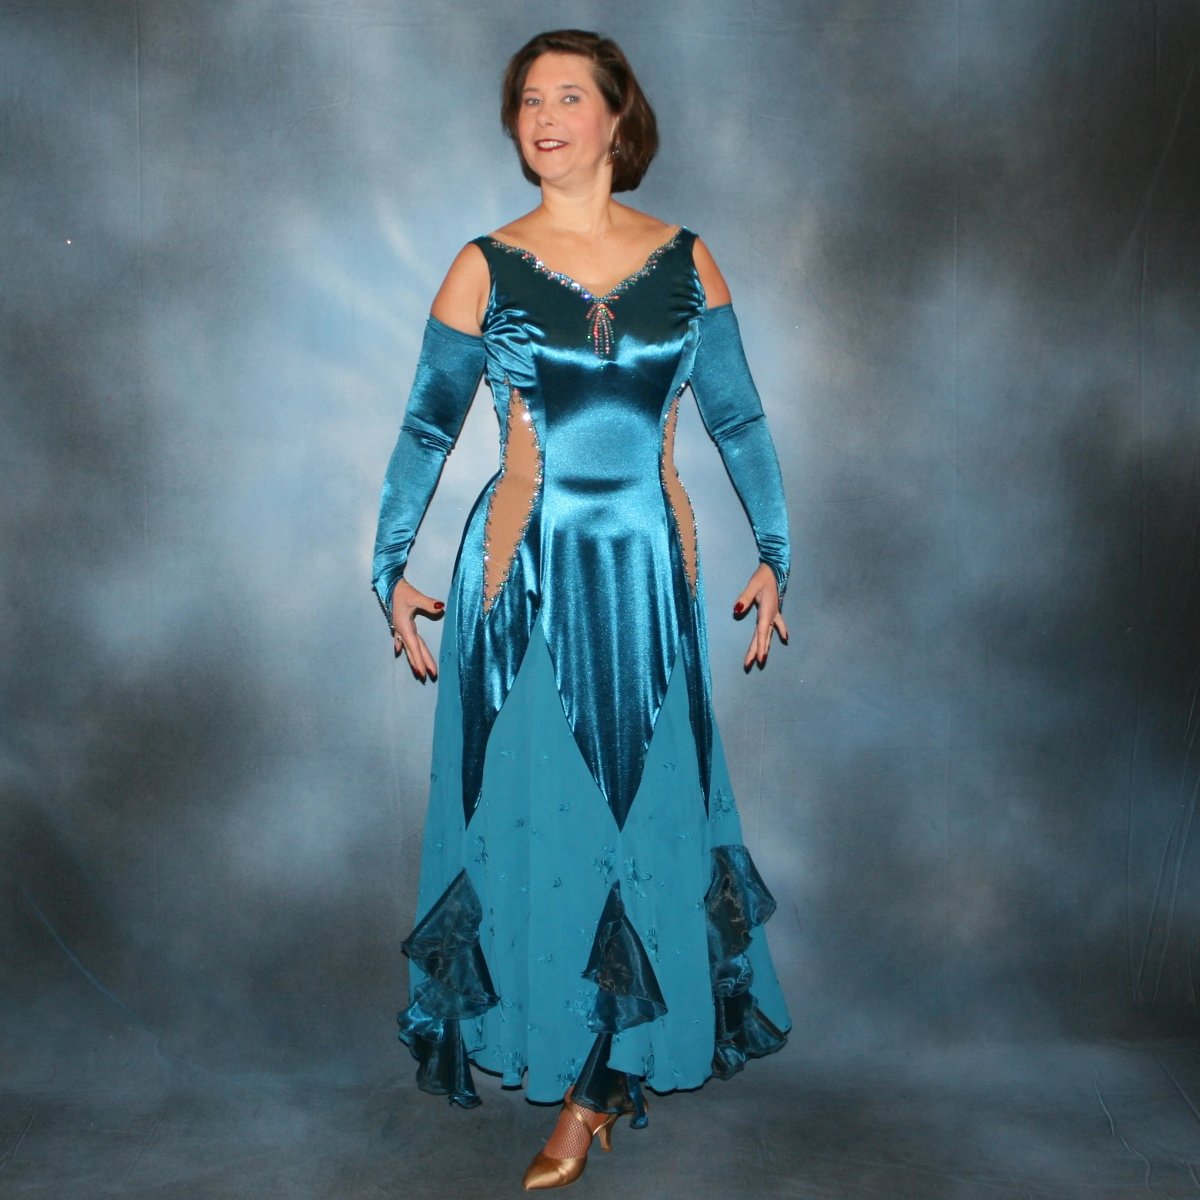 Crystal's Creations Blue ballroom dance dress was created in luxurious deep sea blue stretch satin with deep sea blue crepe chiffon embroidered insets, organza flounces…nude illusion cutout detailing…embellished with CAB & blue zircon Ab Swarovski stonework.